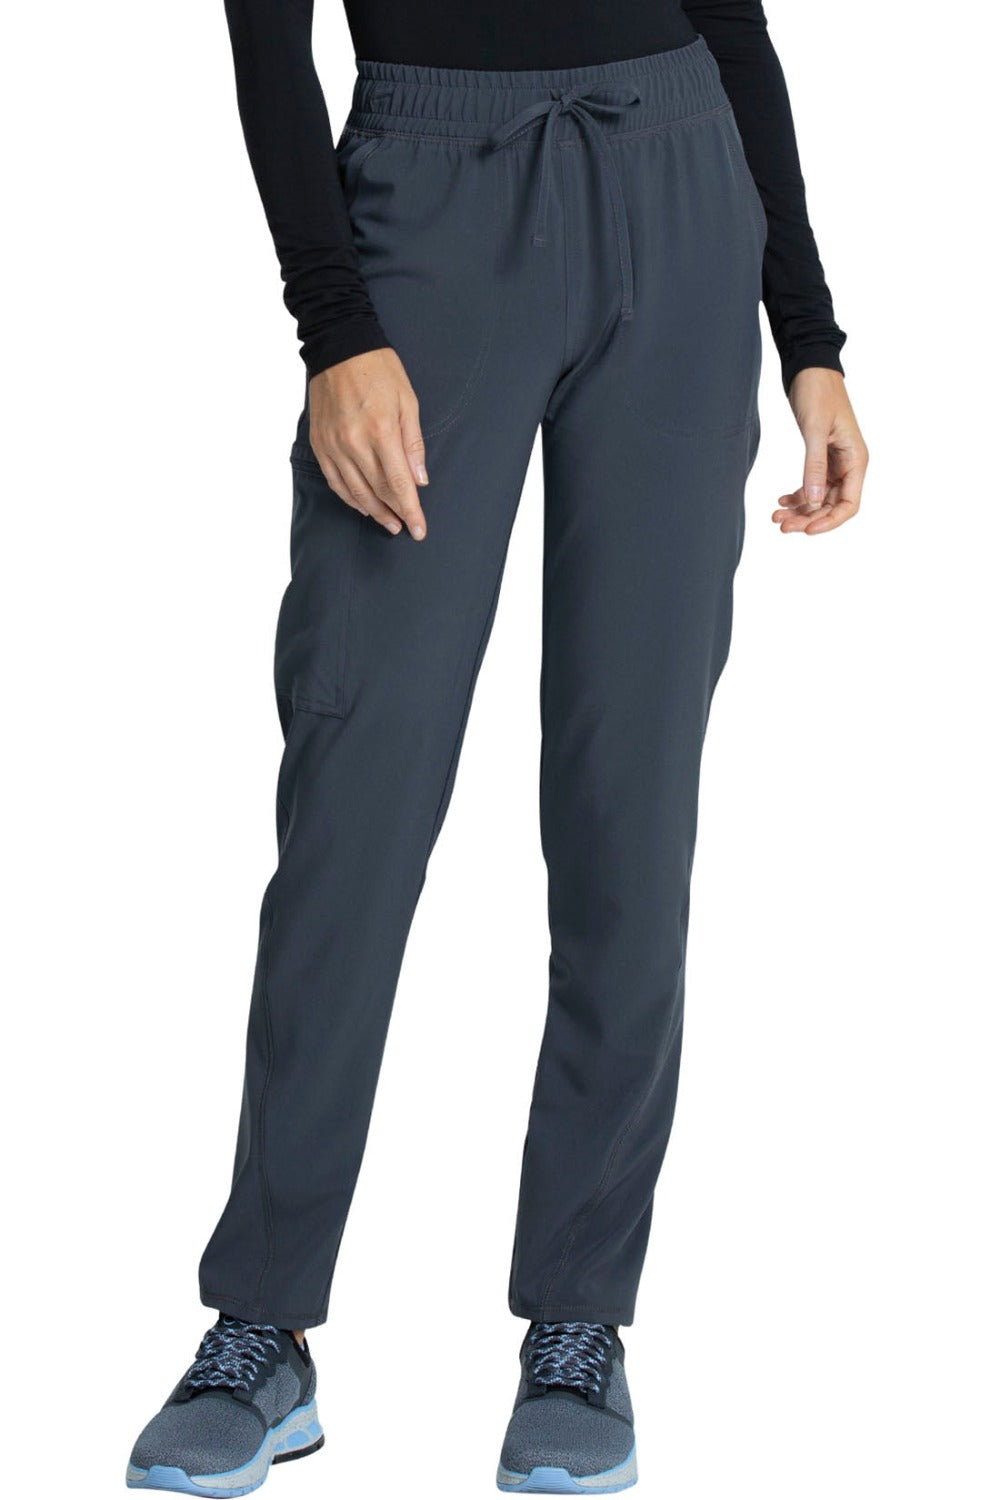 Cherokee Allura Scrub Pant Mid Rise Tapered Leg Drawstring in Pewter at Parker's Clothing and Shoes.